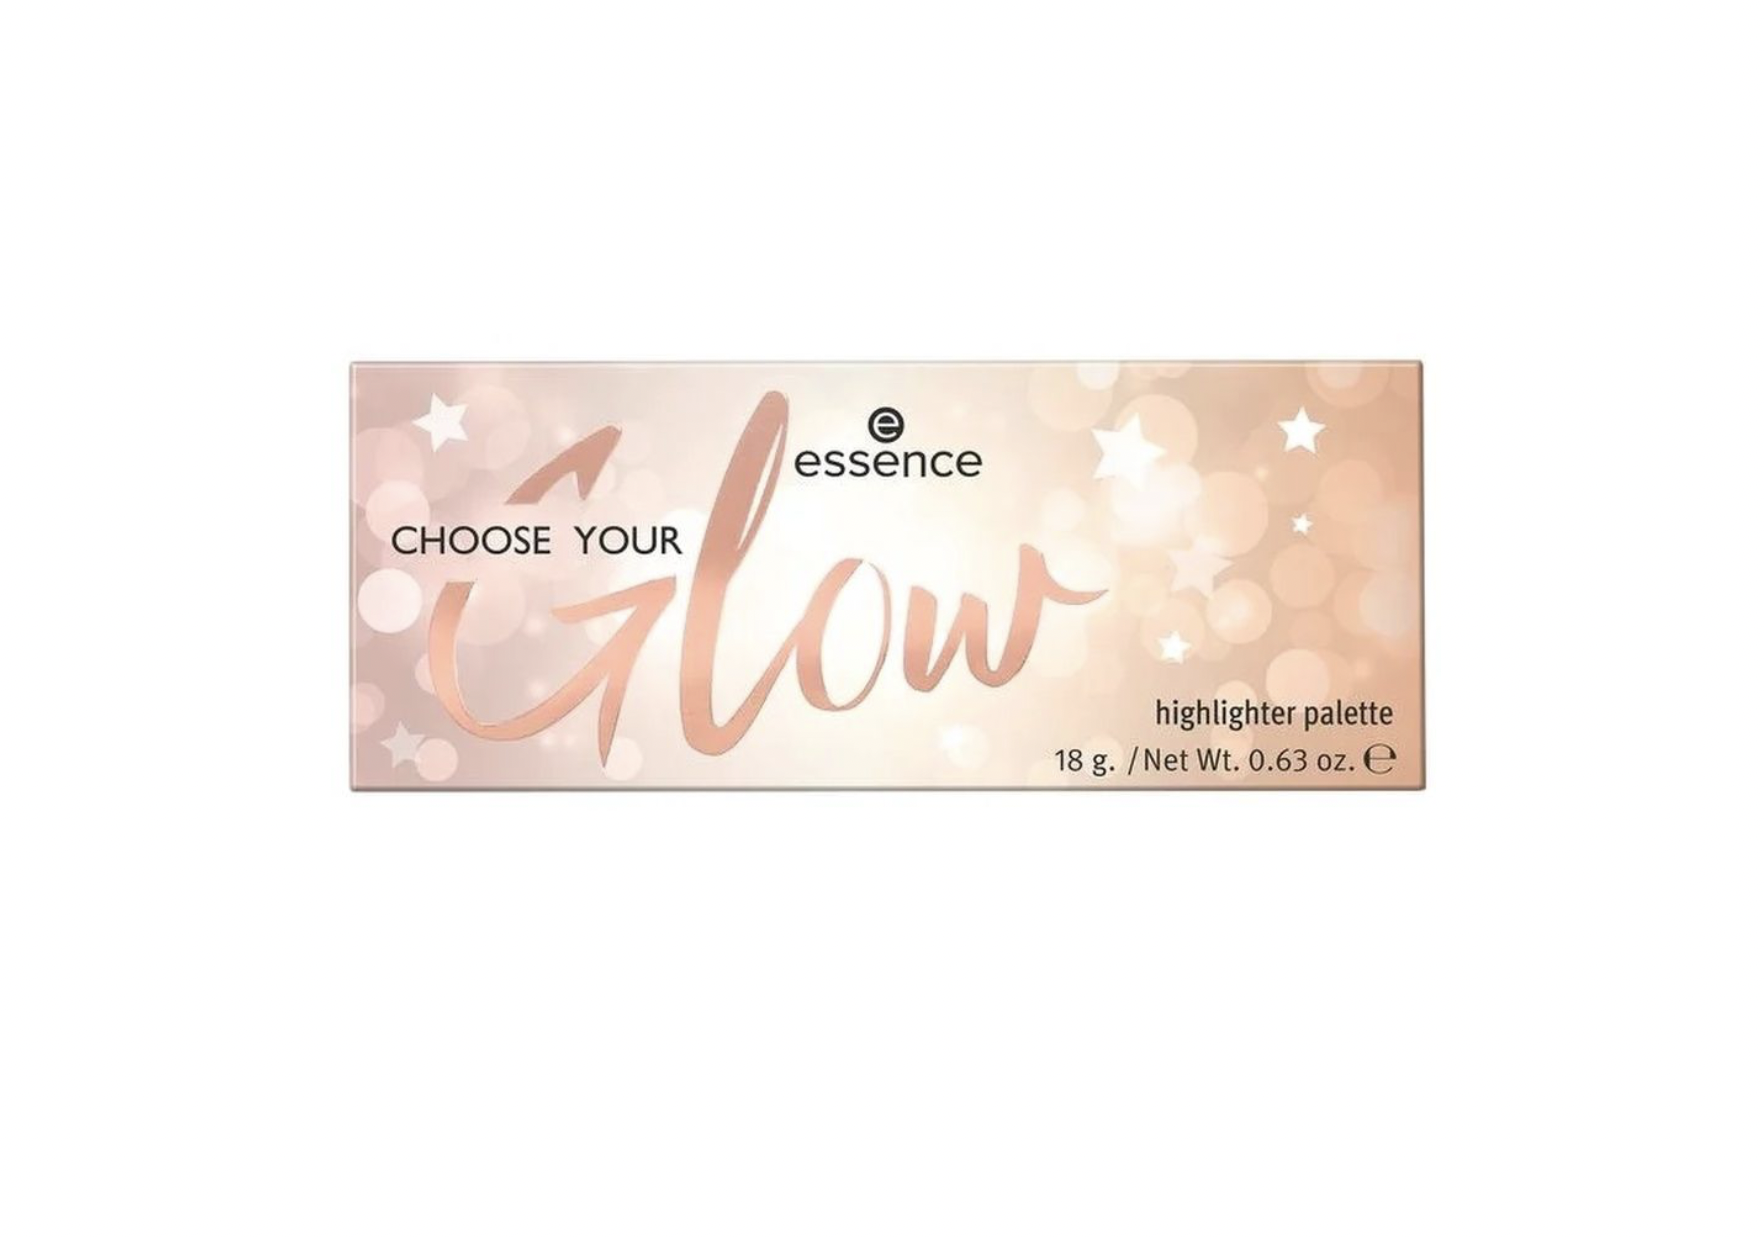   / Essence -     Choose Your Glow 18 